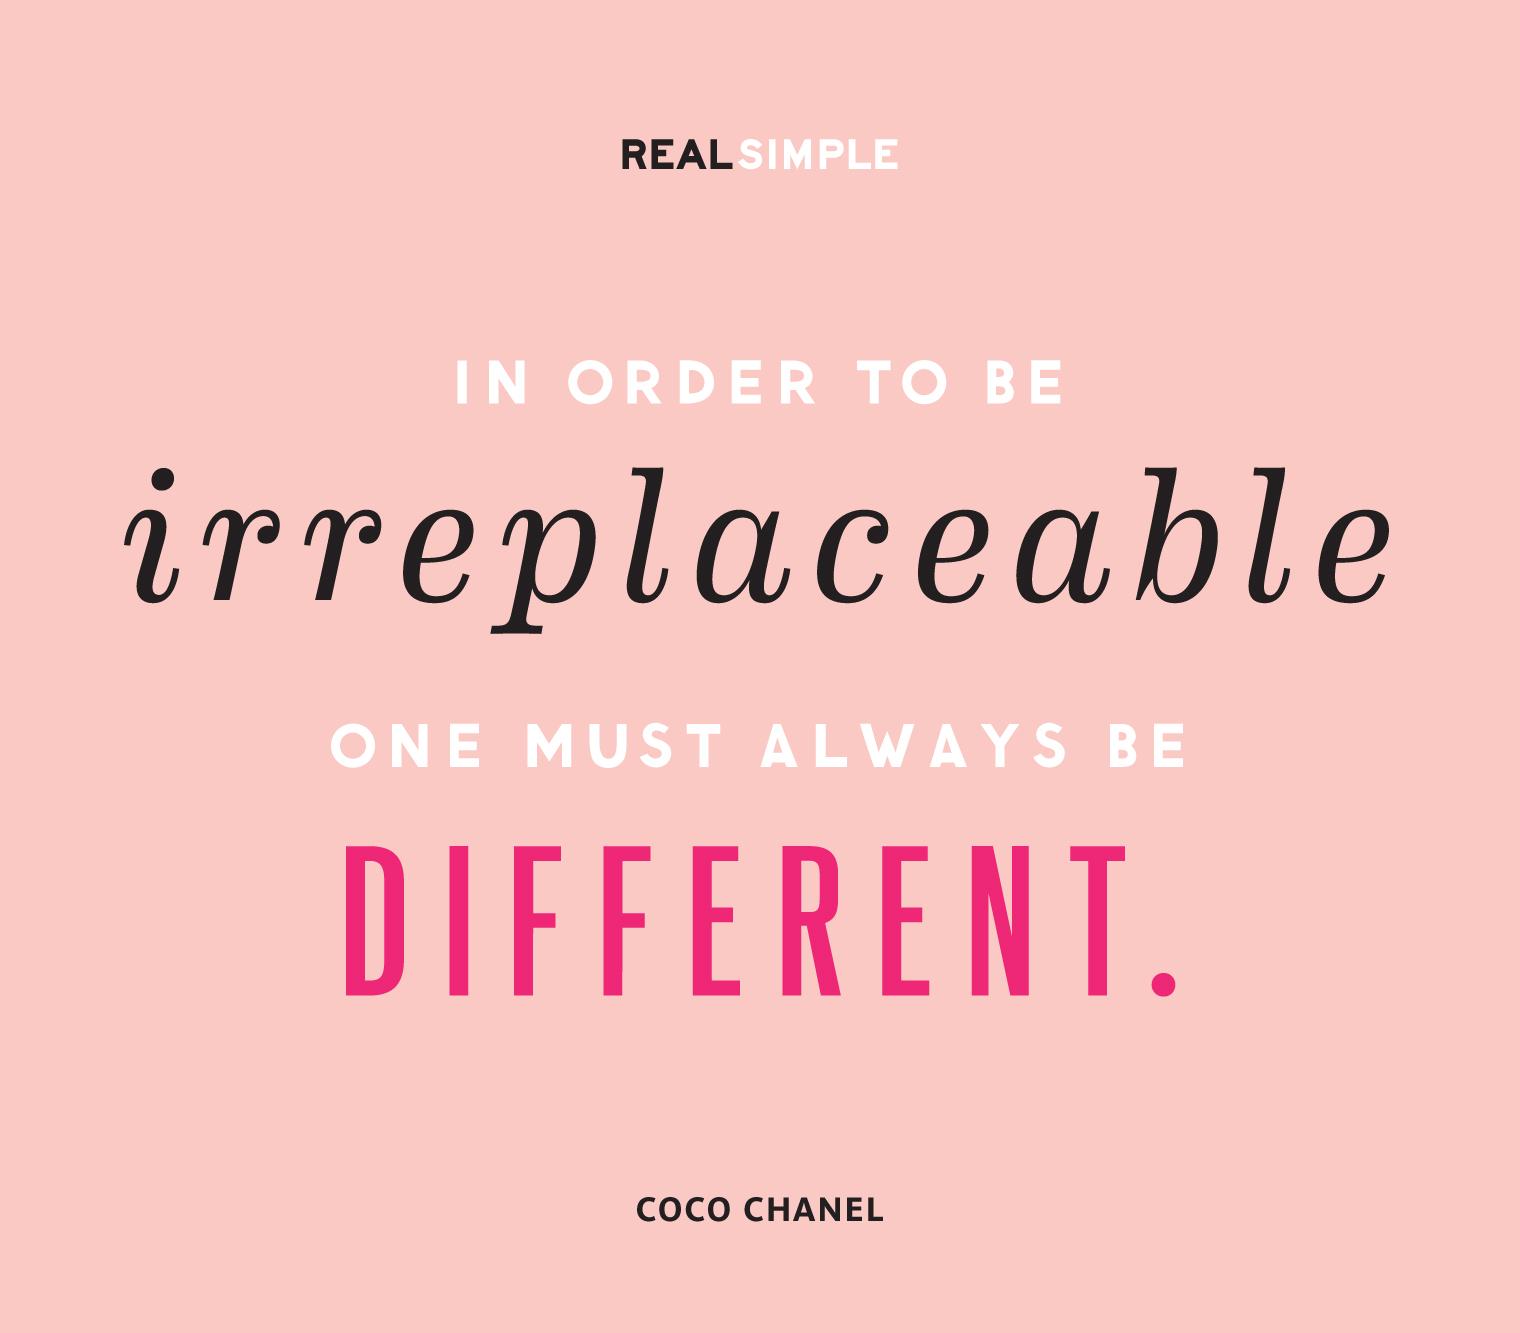 Real Simple on X: In order to be irreplaceable one must always